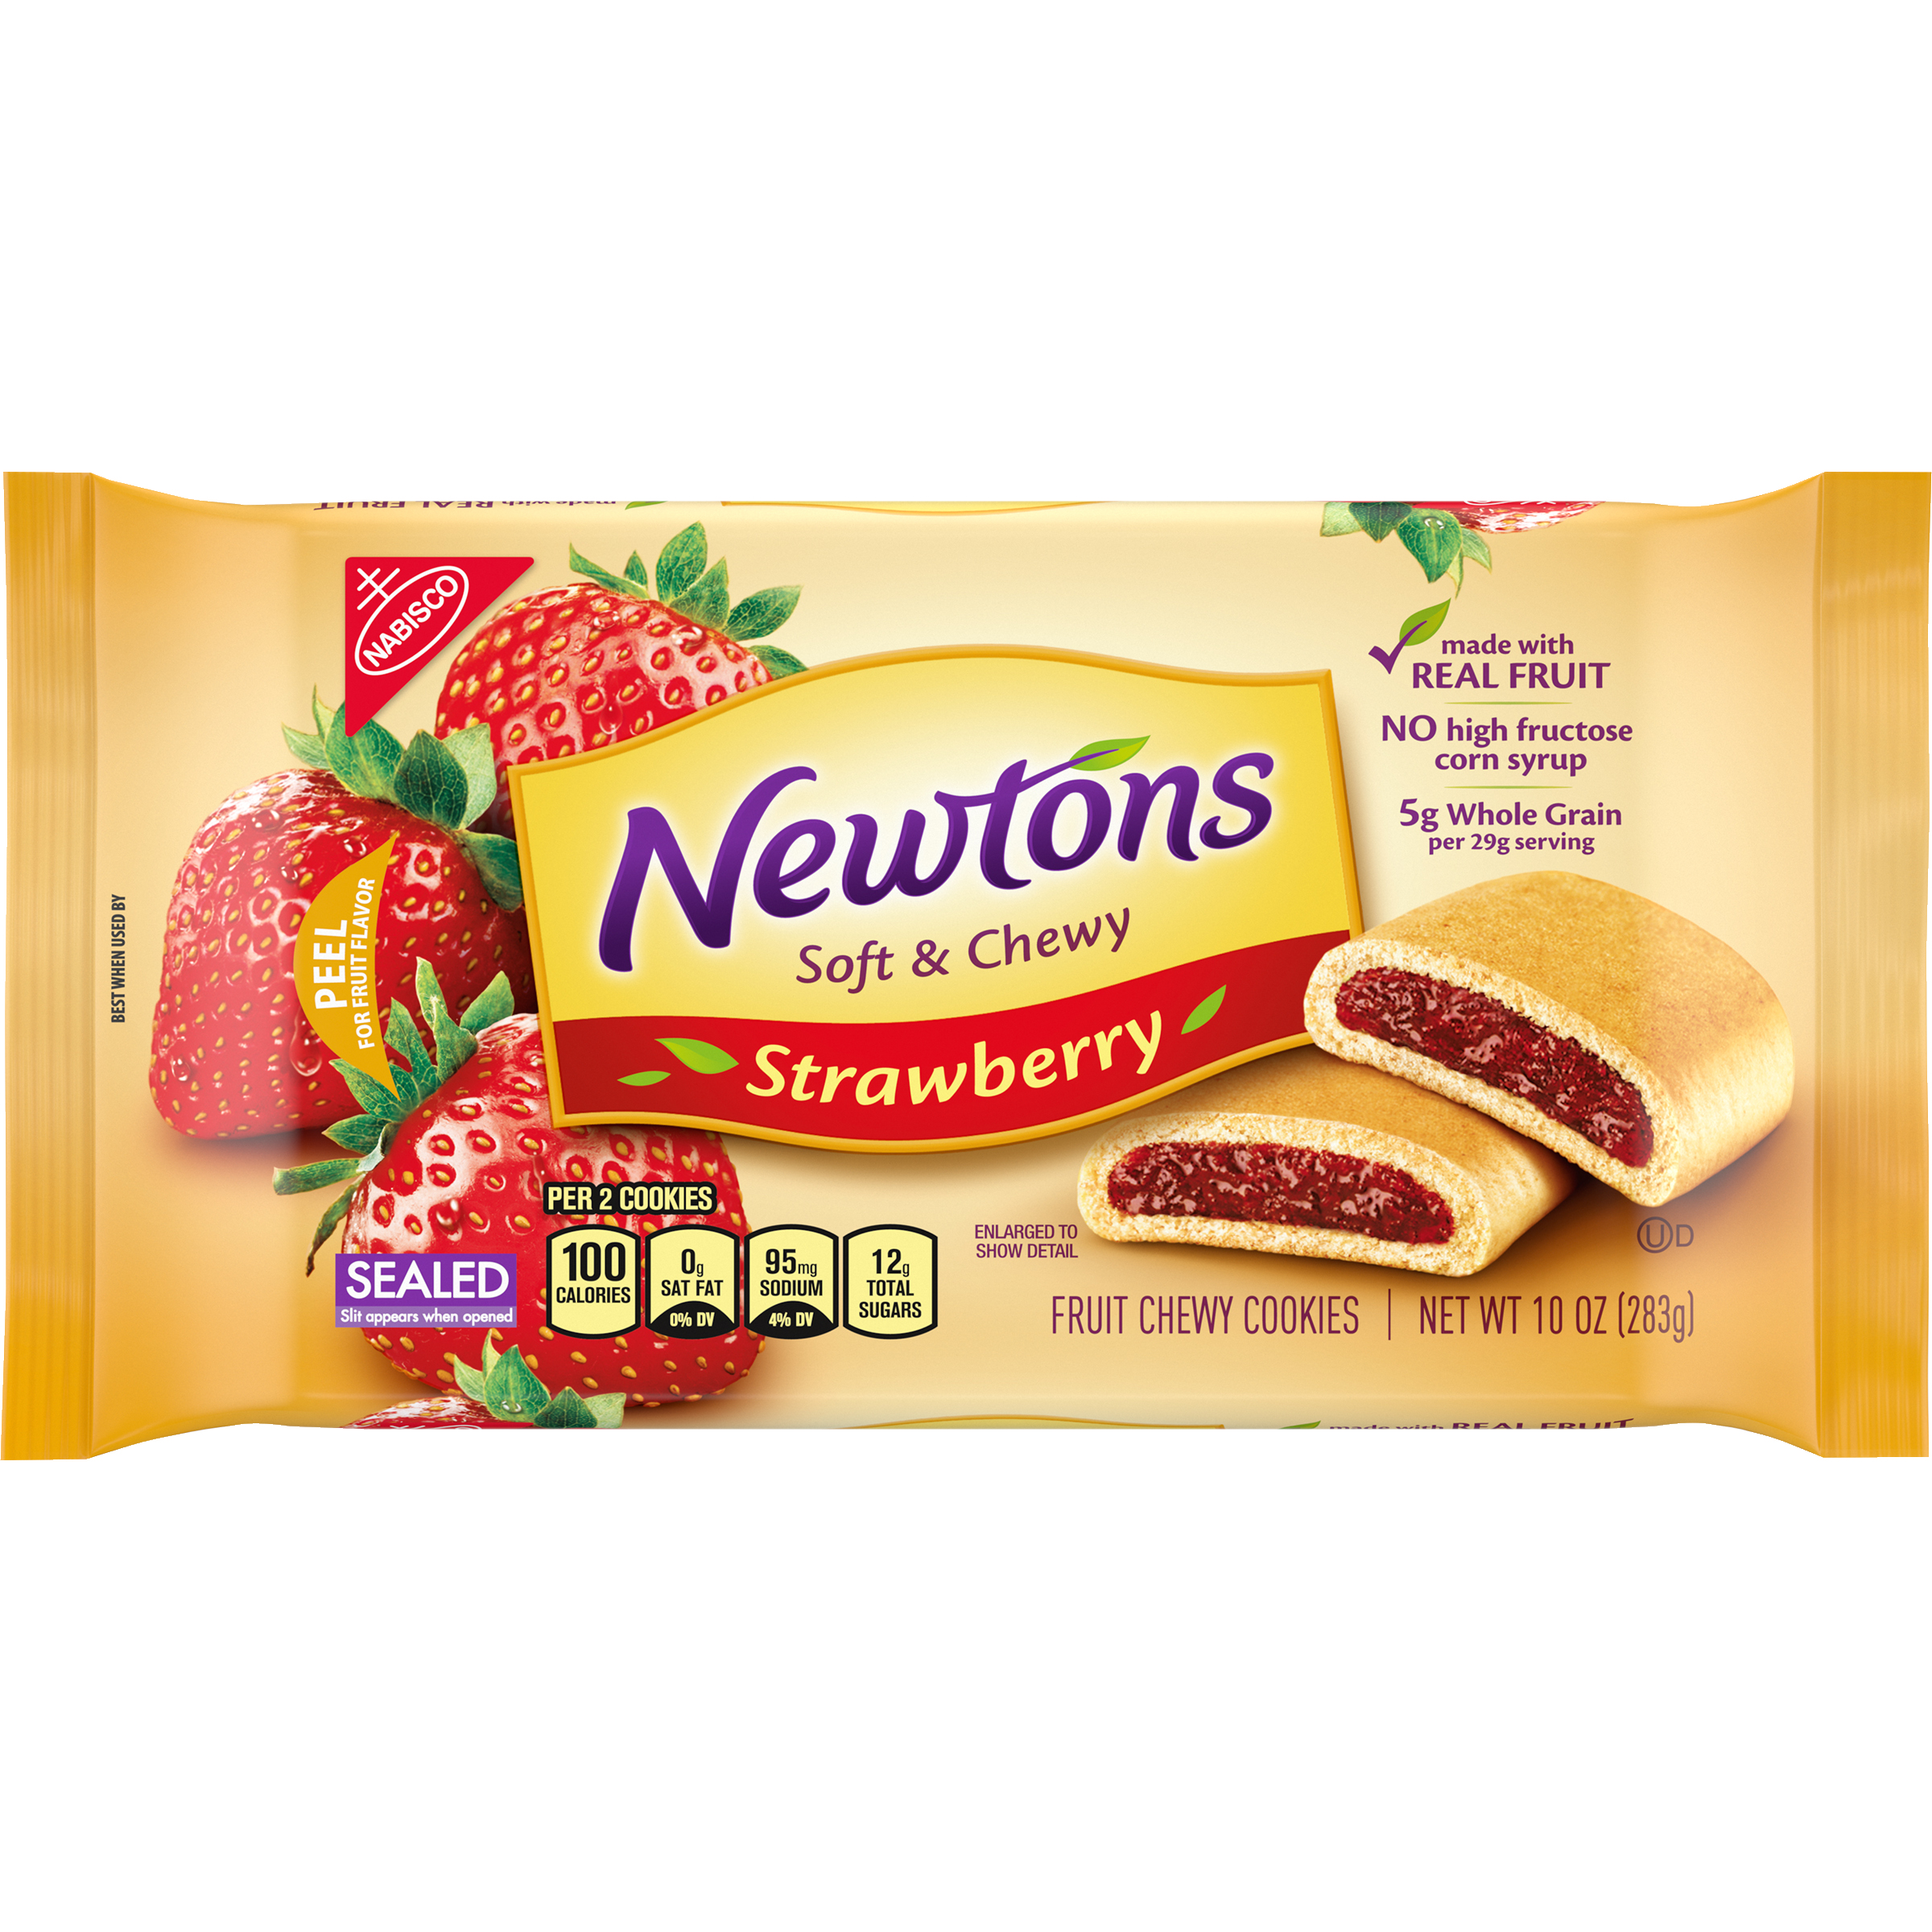 Newtons Soft & Fruit Chewy Strawberry Cookies, 10 oz Pack-1